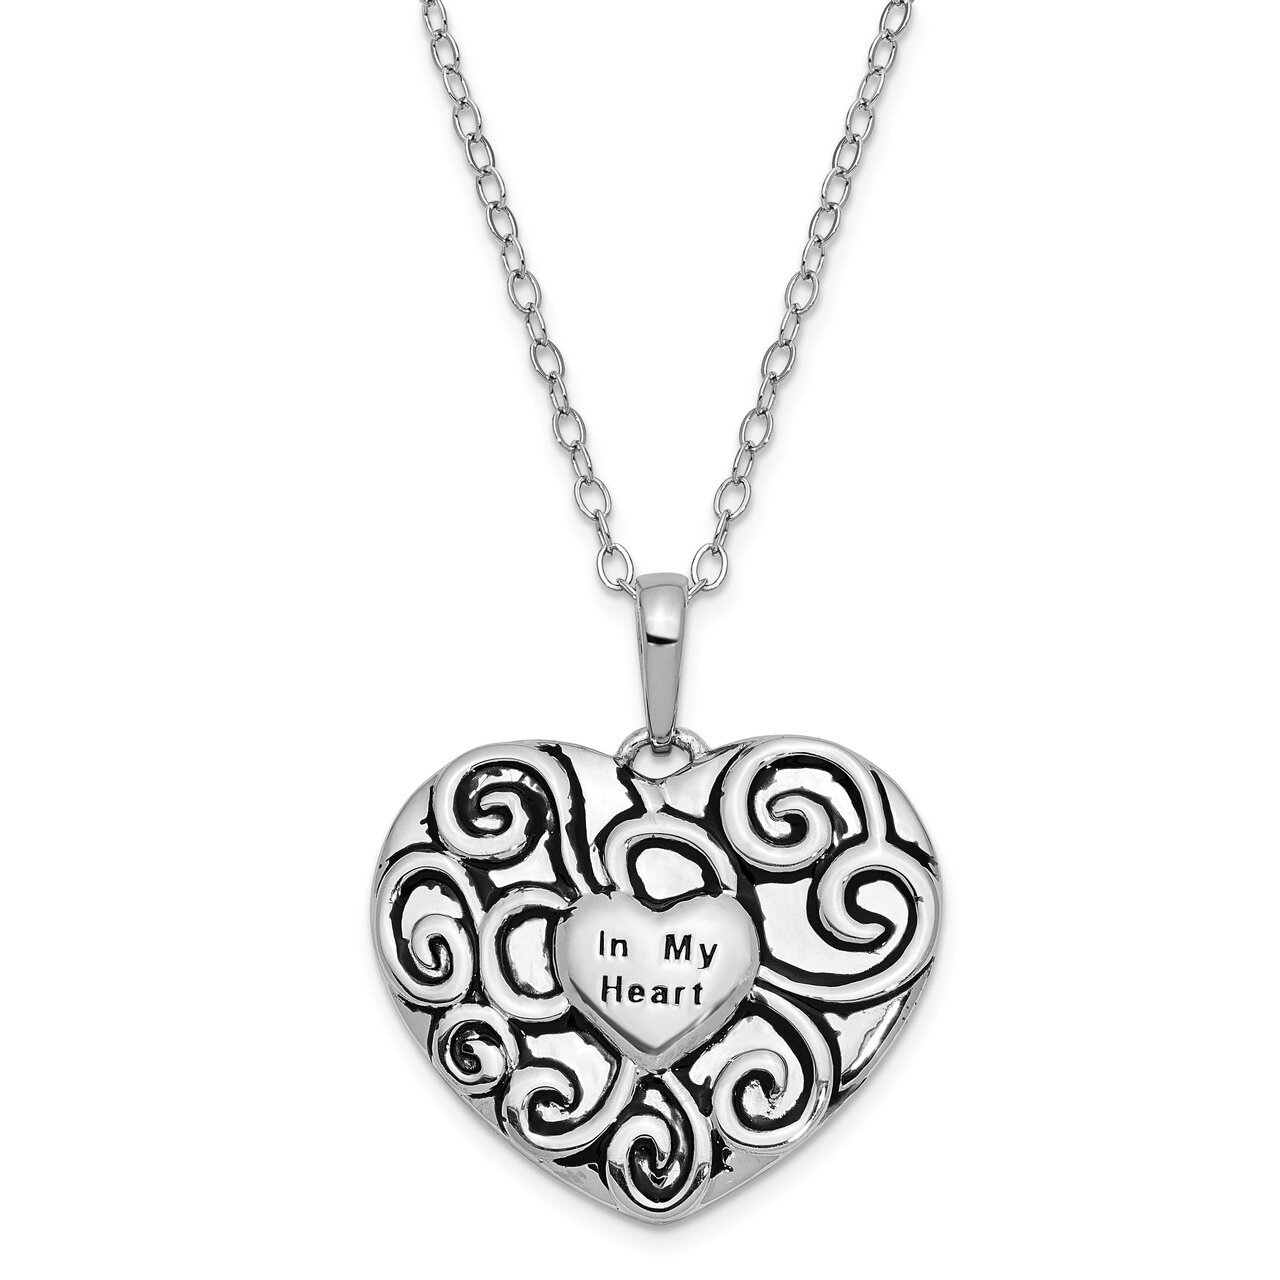 In My Heart 18 Inch Necklace Sterling Silver Antiqued QSX698